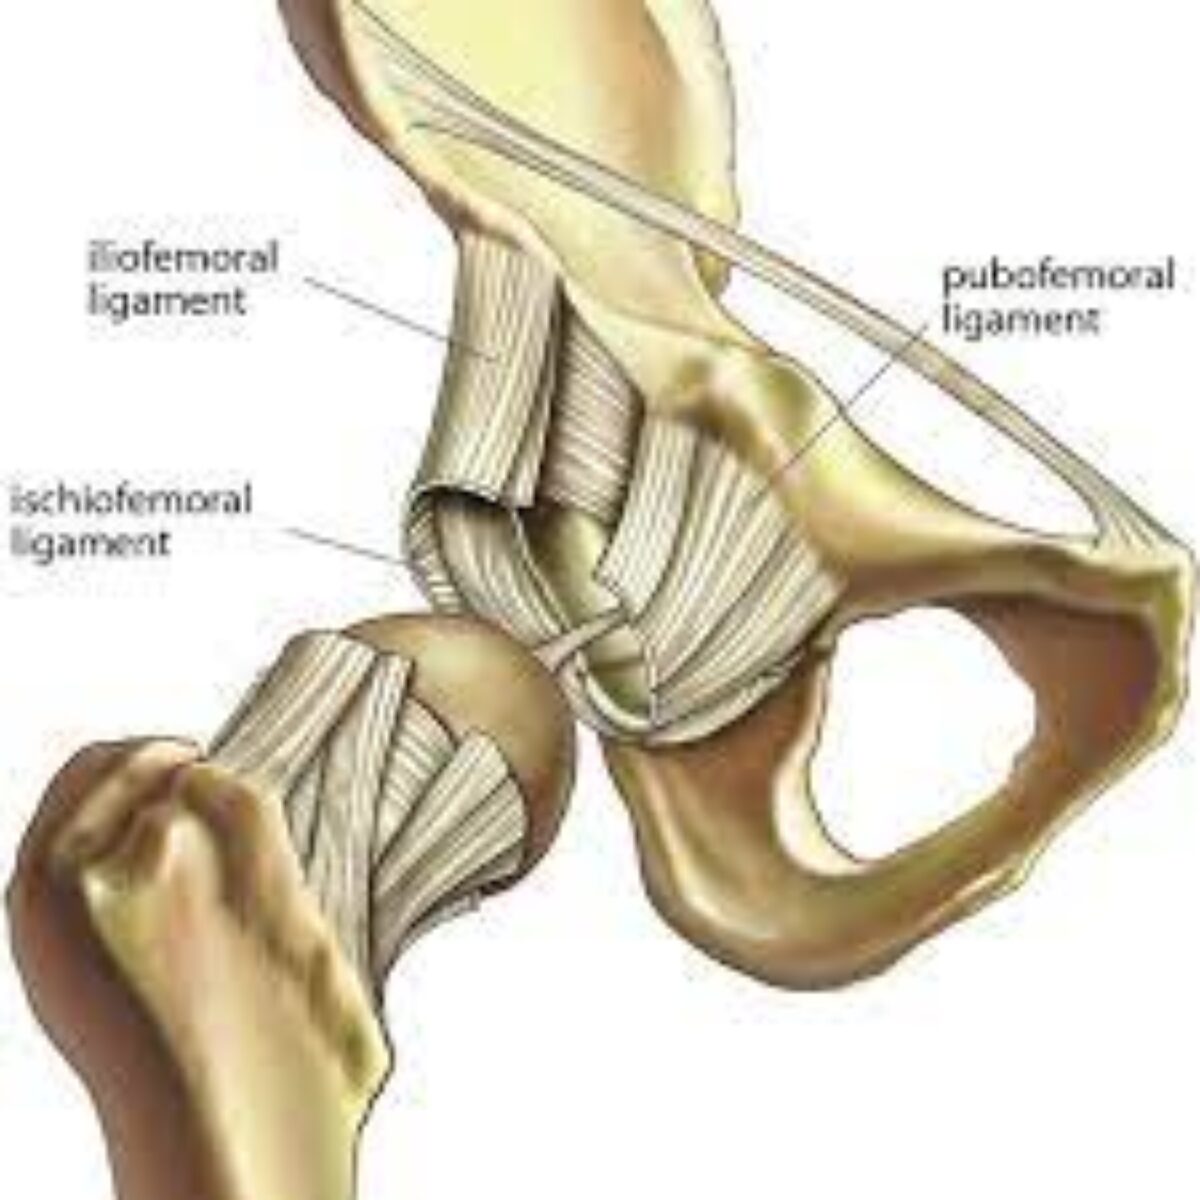 Hip Labral Tear Recovery Without Surgery